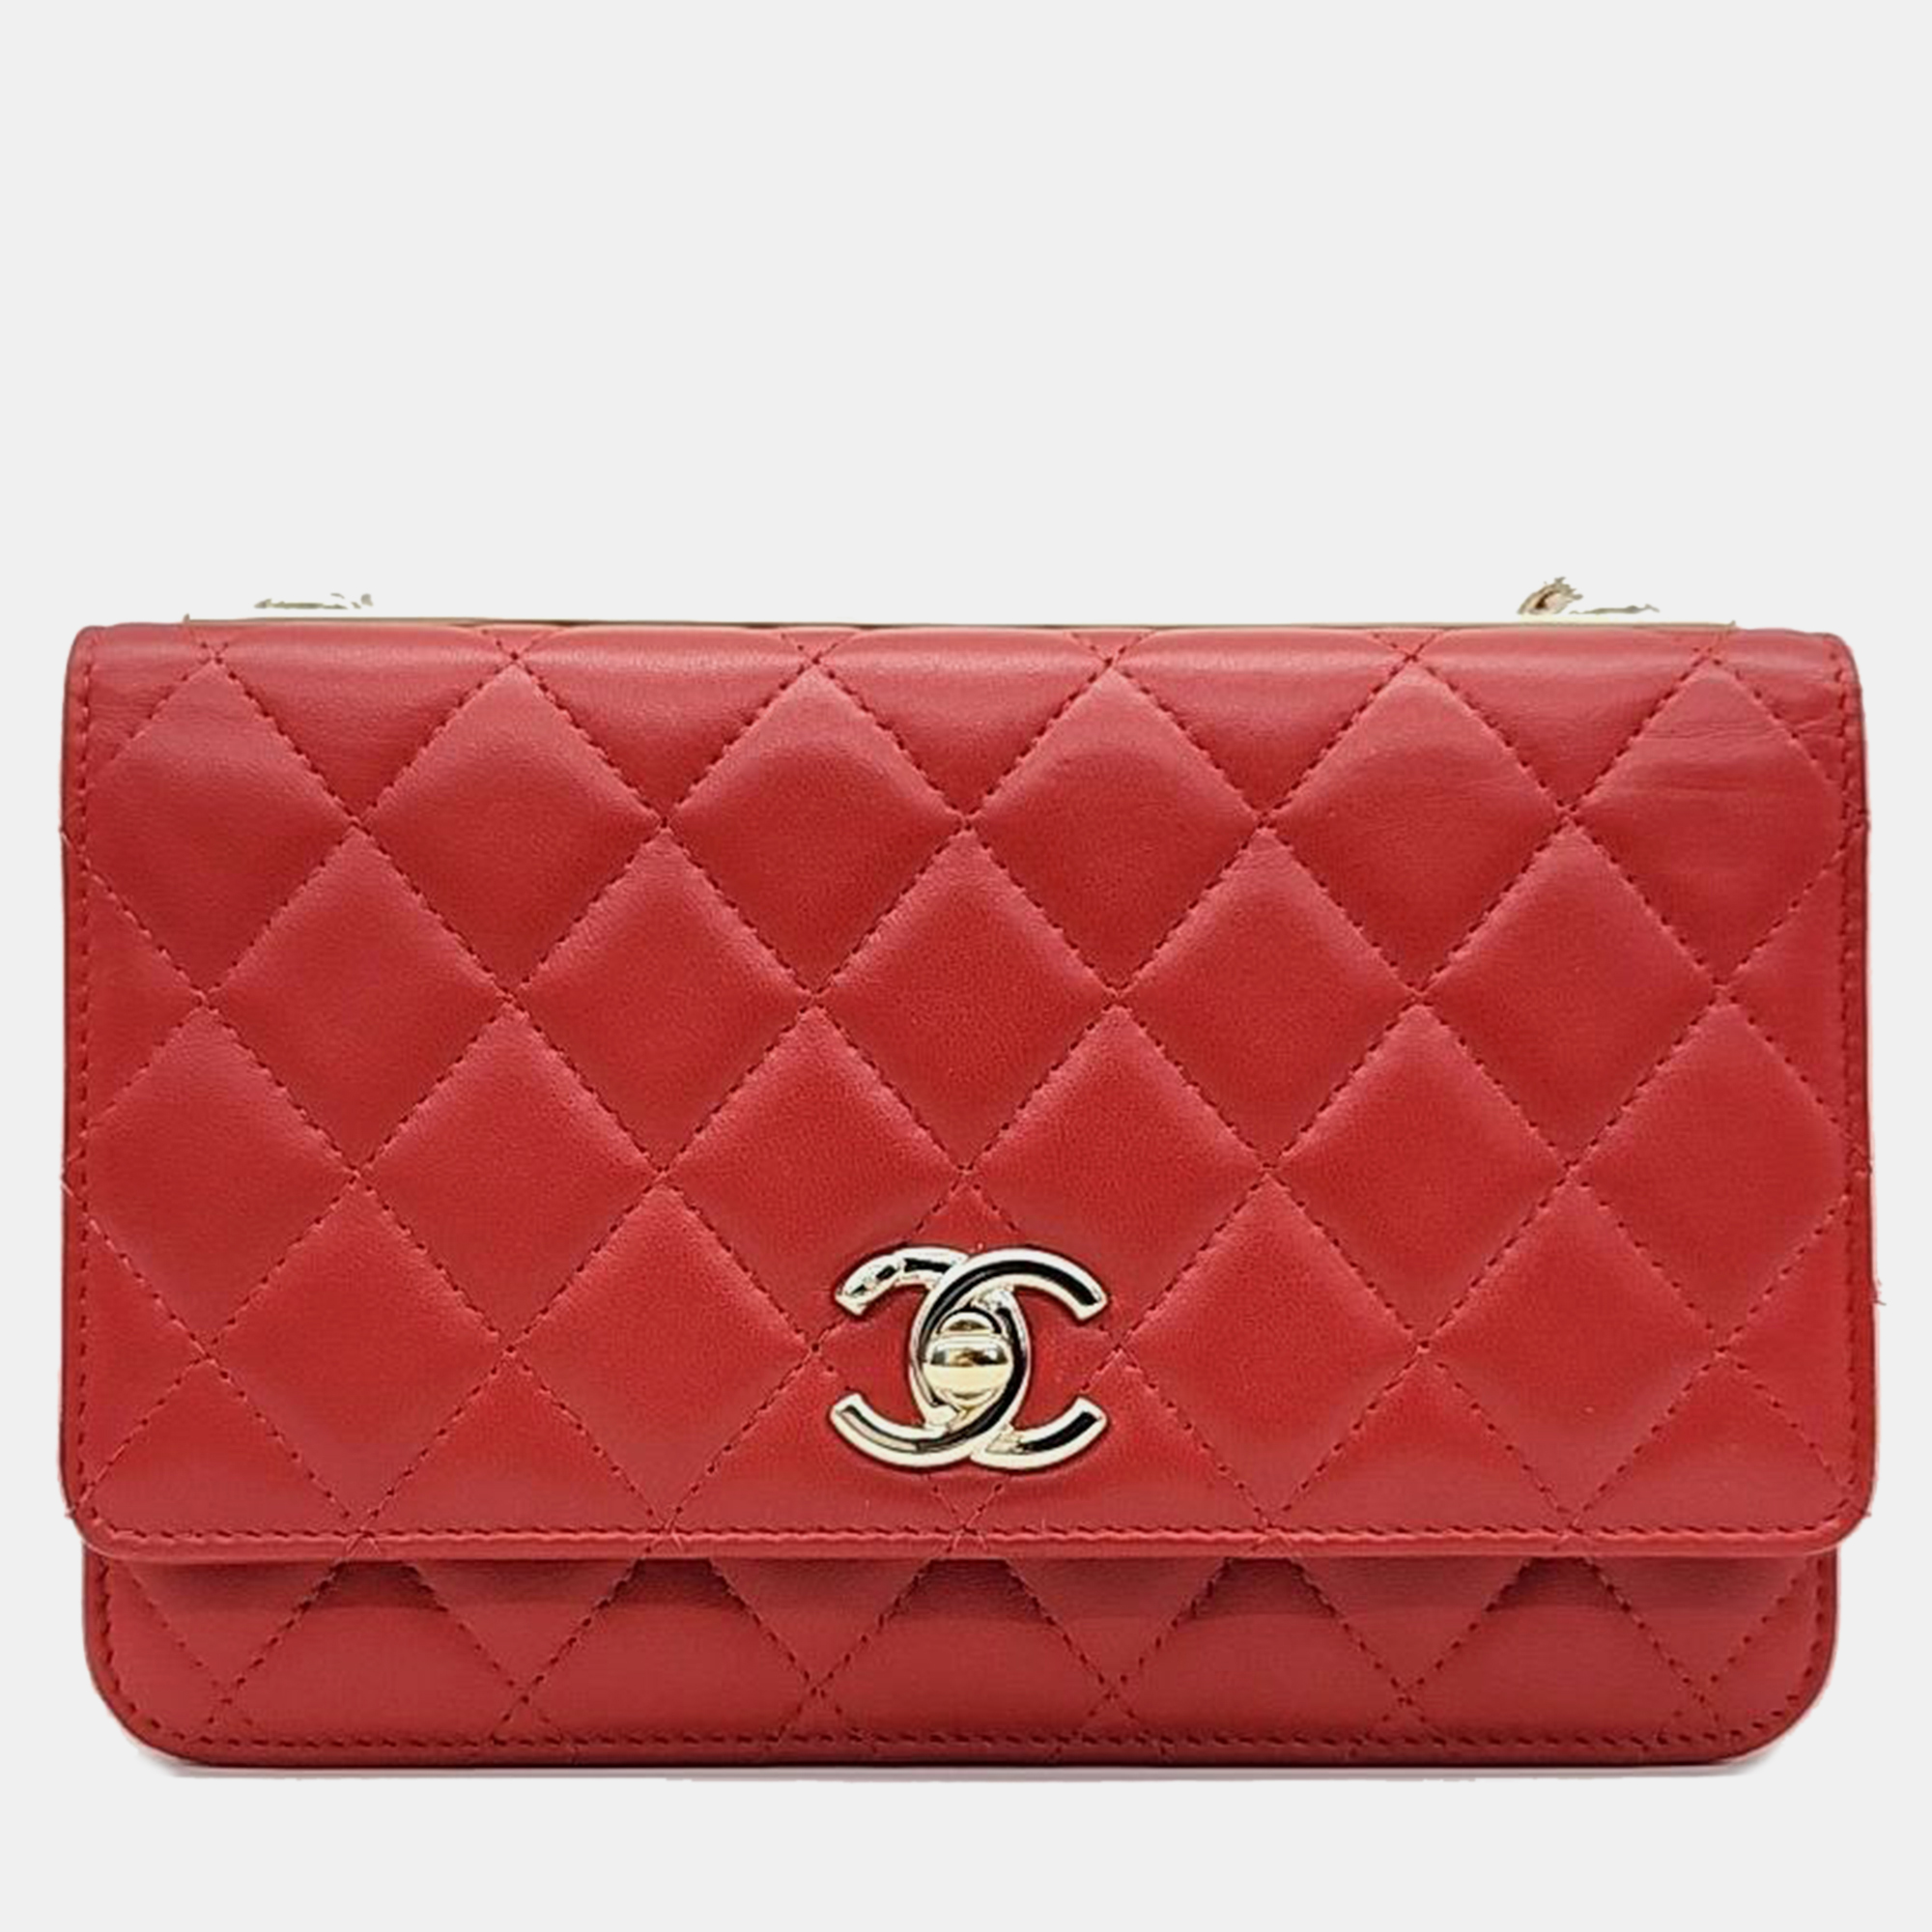 Chanel red lambskin leather classic wallet on chain